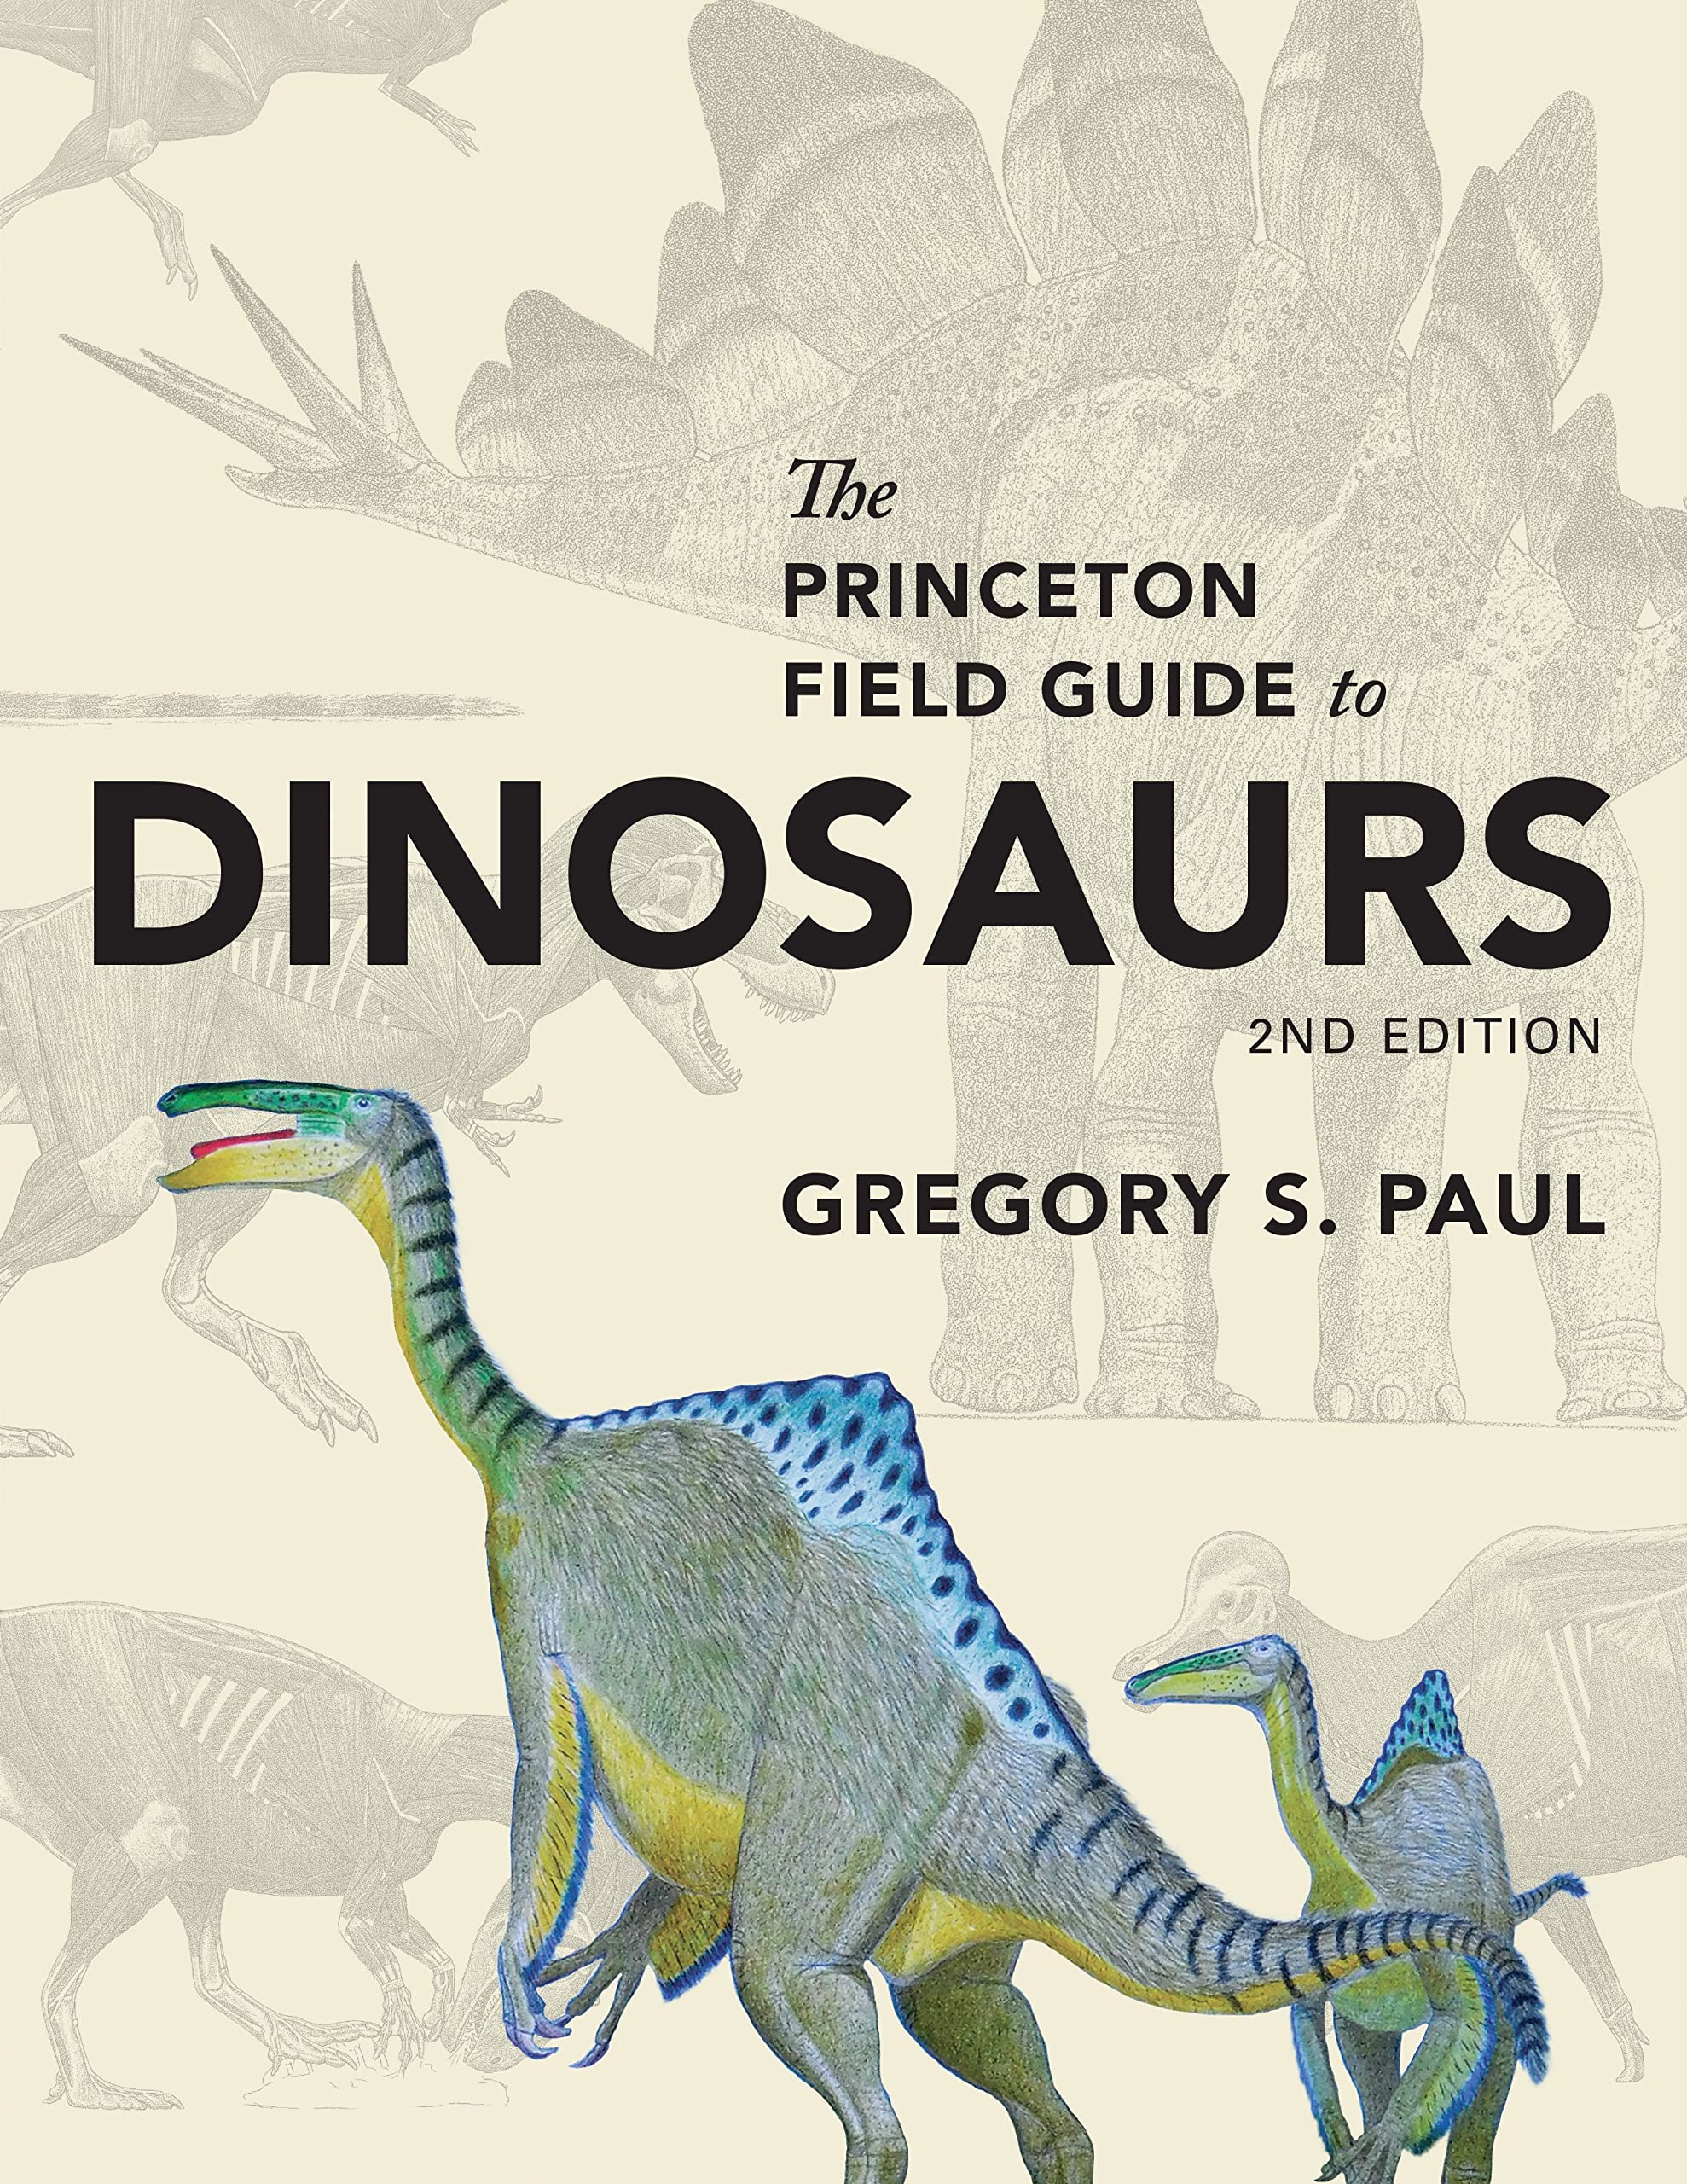 The Princeton Field Guide to Dinosaurs (2nd Edition)